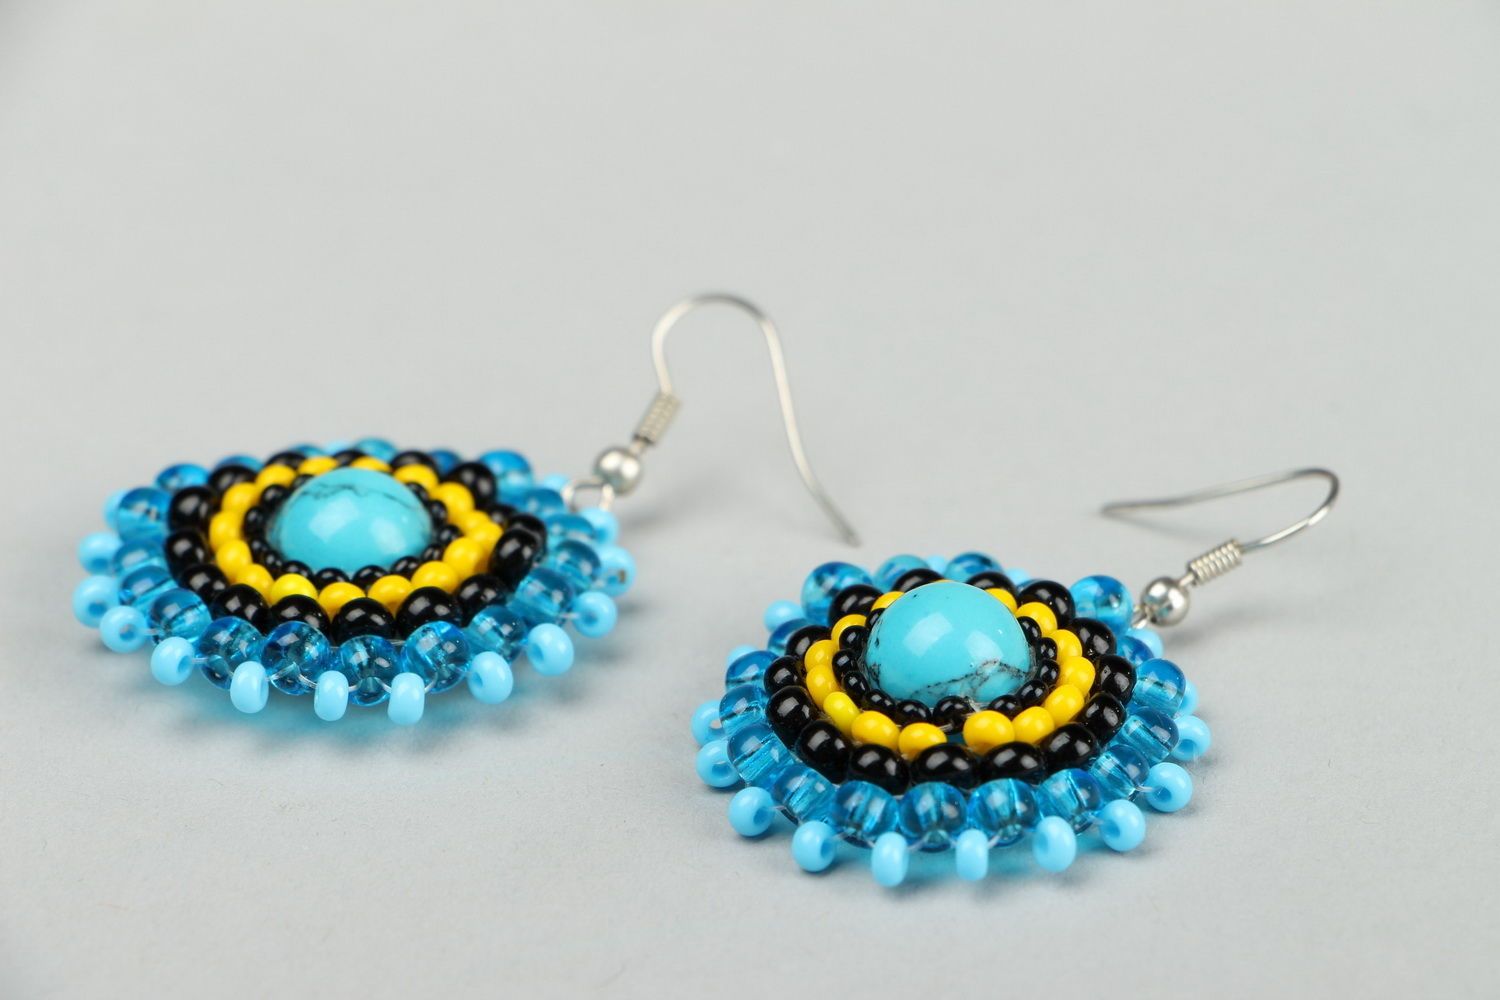 Earrings made of beads and turquoise photo 1